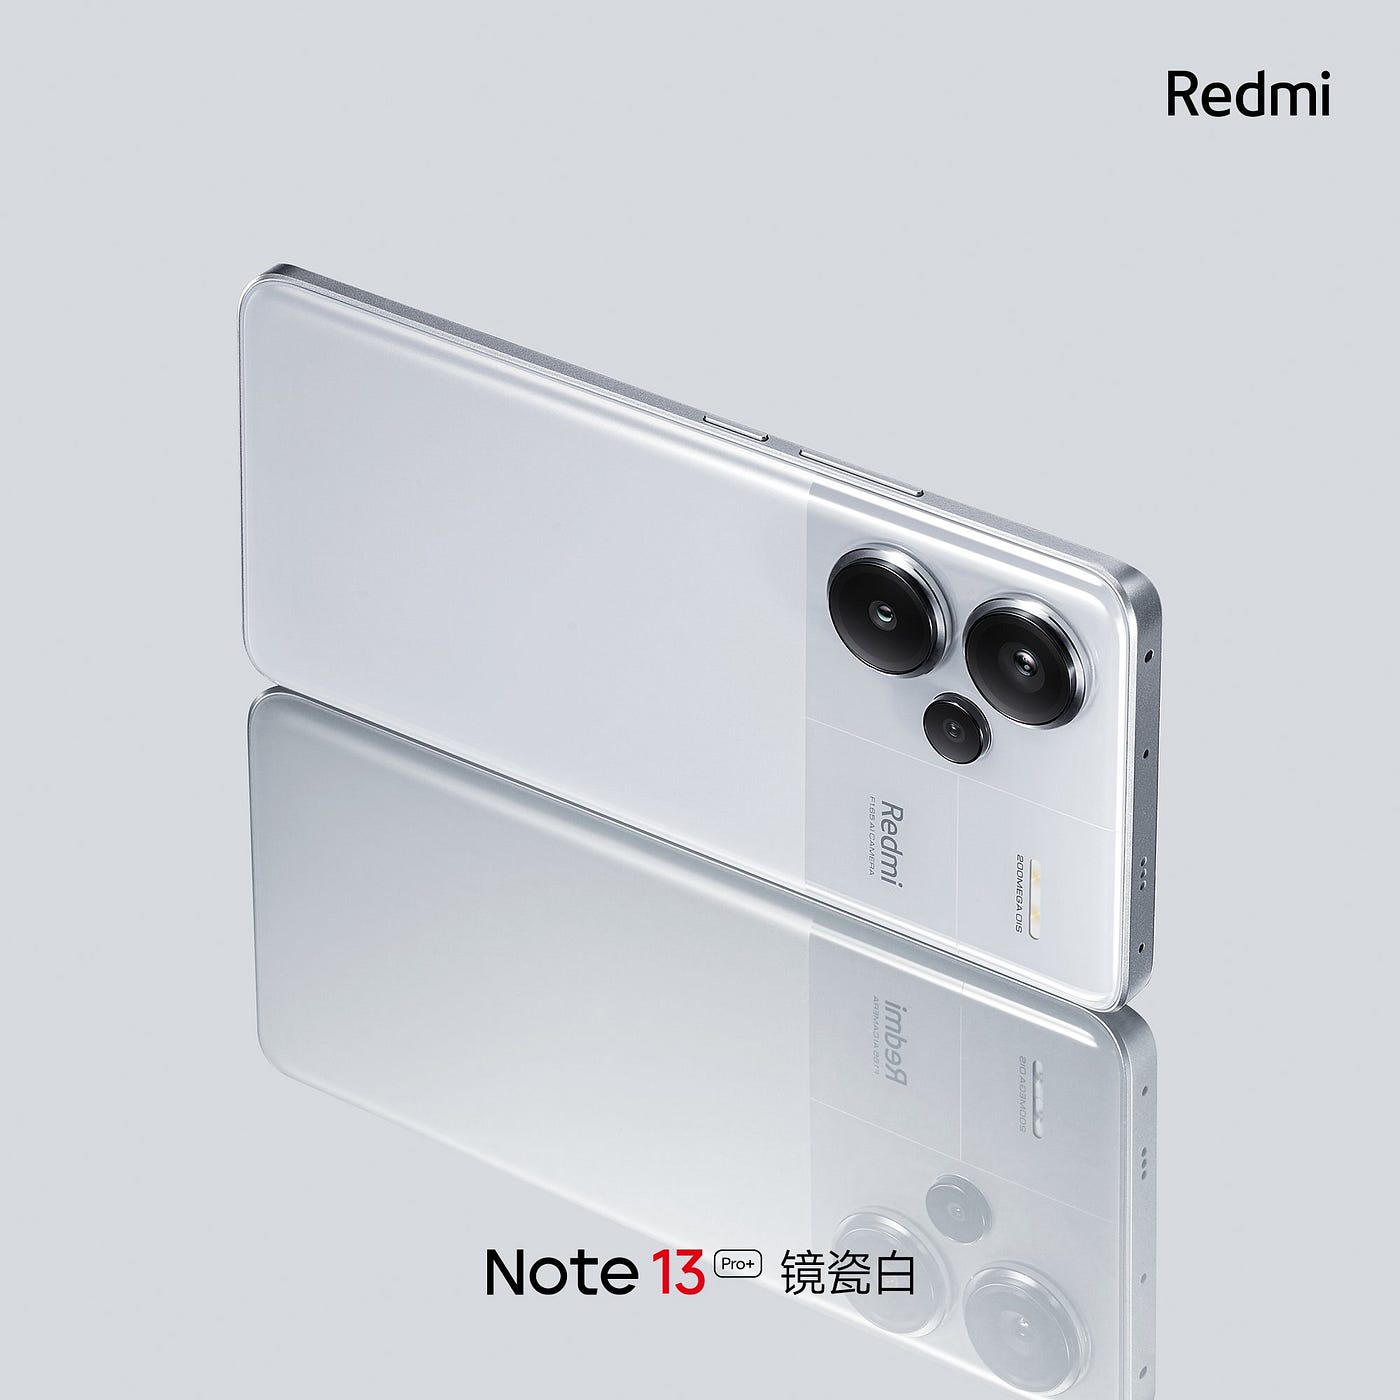 Redmi Note 13 5G: The Budget King Is Back and Ready to Reign, by Arjun  Agarwal, Jan, 2024